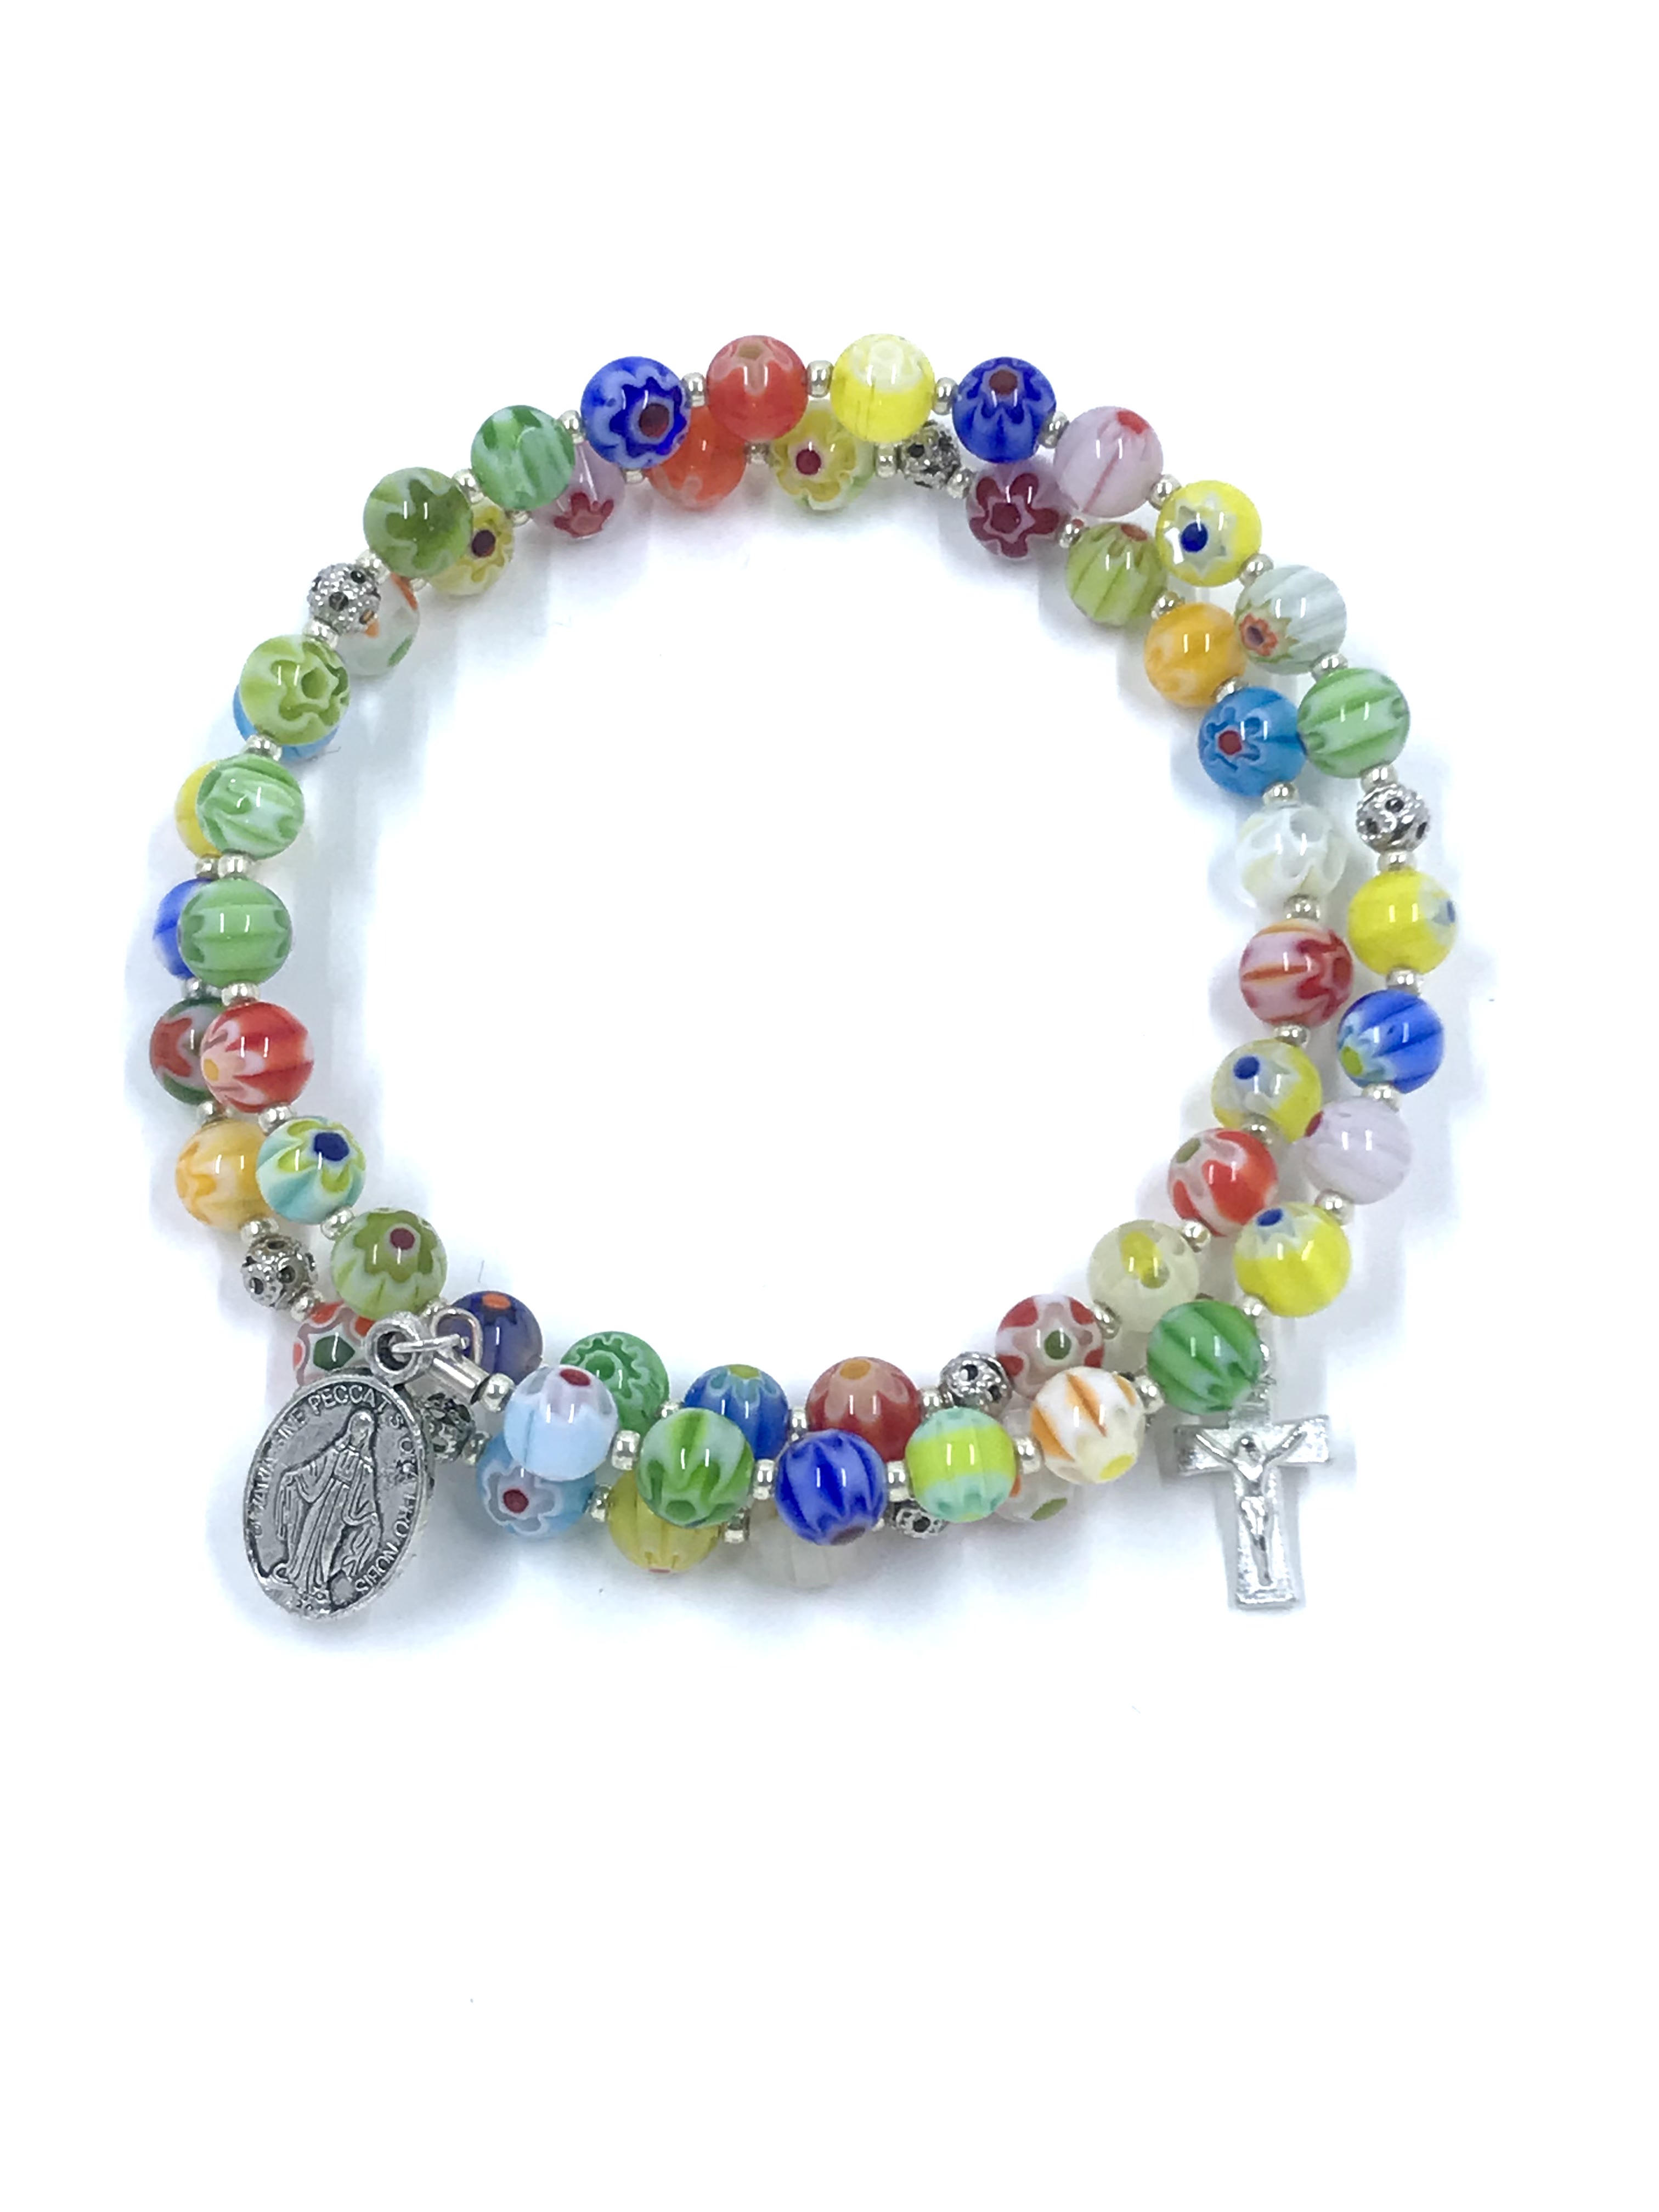 rosary bracelet made with multicolored millefiori beads on memory wire